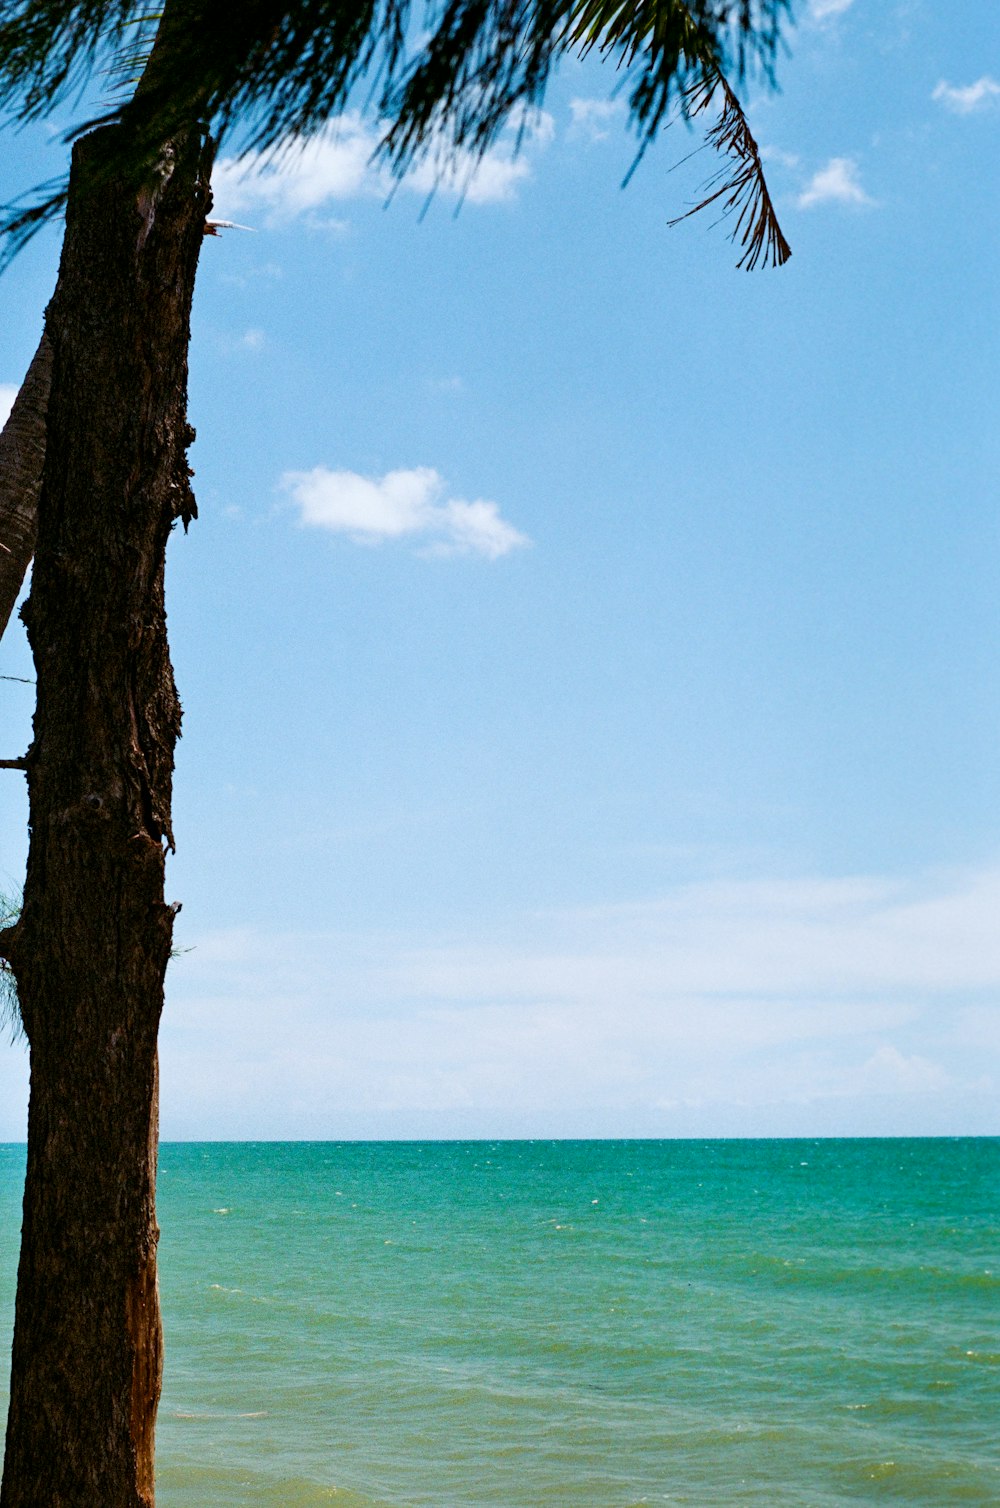 a view of a body of water from a beach